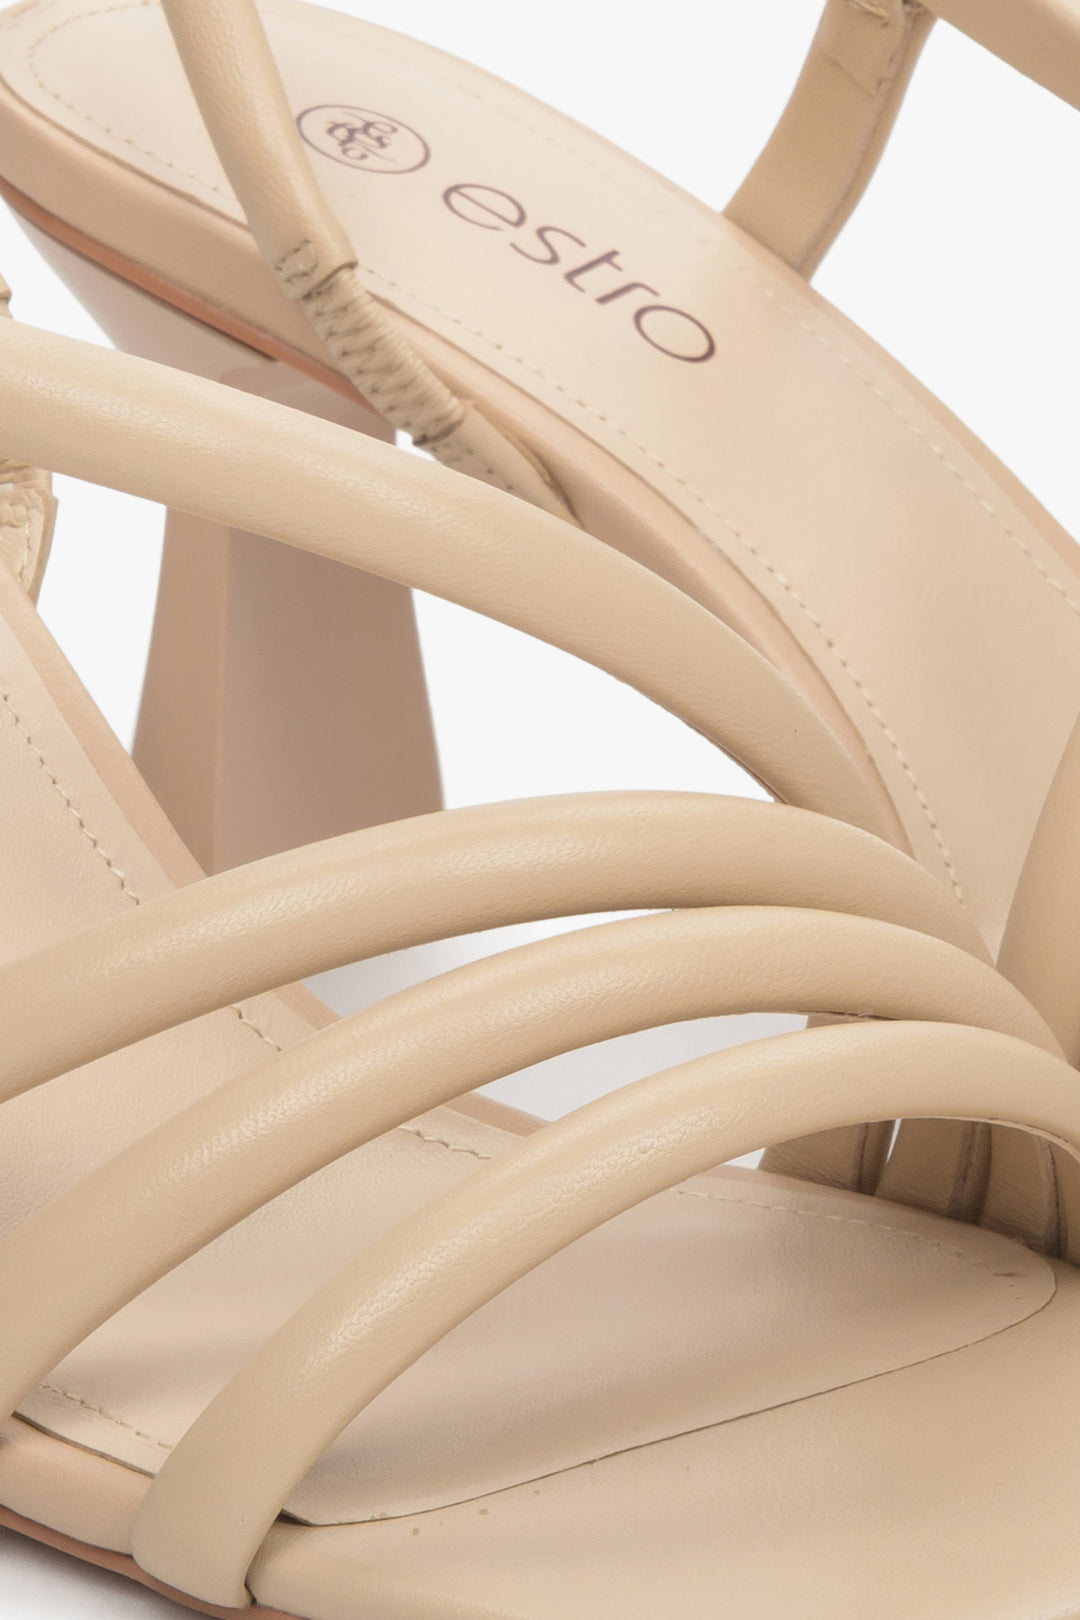 Women's strappy sandals in beige made of natural leather by Estro - a close up on details.